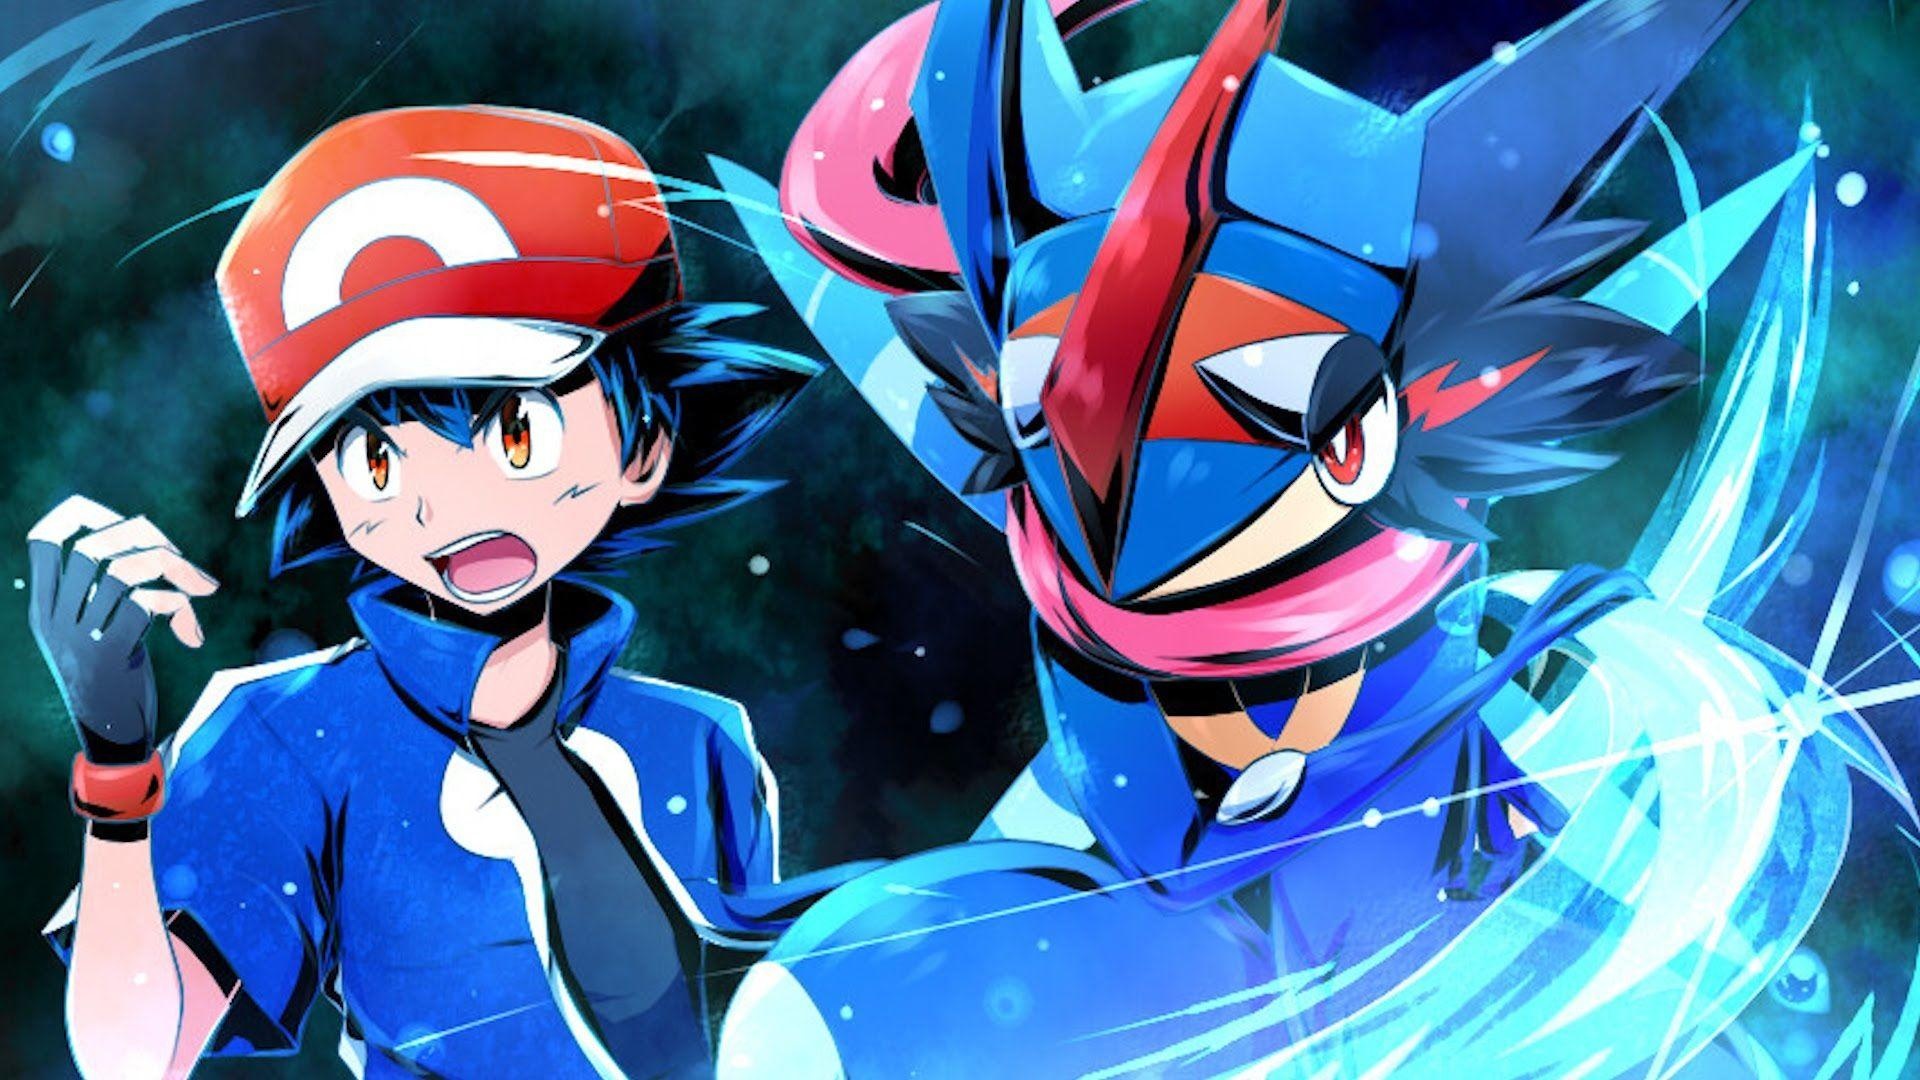 Greninja: Pokemon X and Y, 2013 role-playing video games developed by Game Freak, published by The Pokemon Company. 1920x1080 Full HD Background.